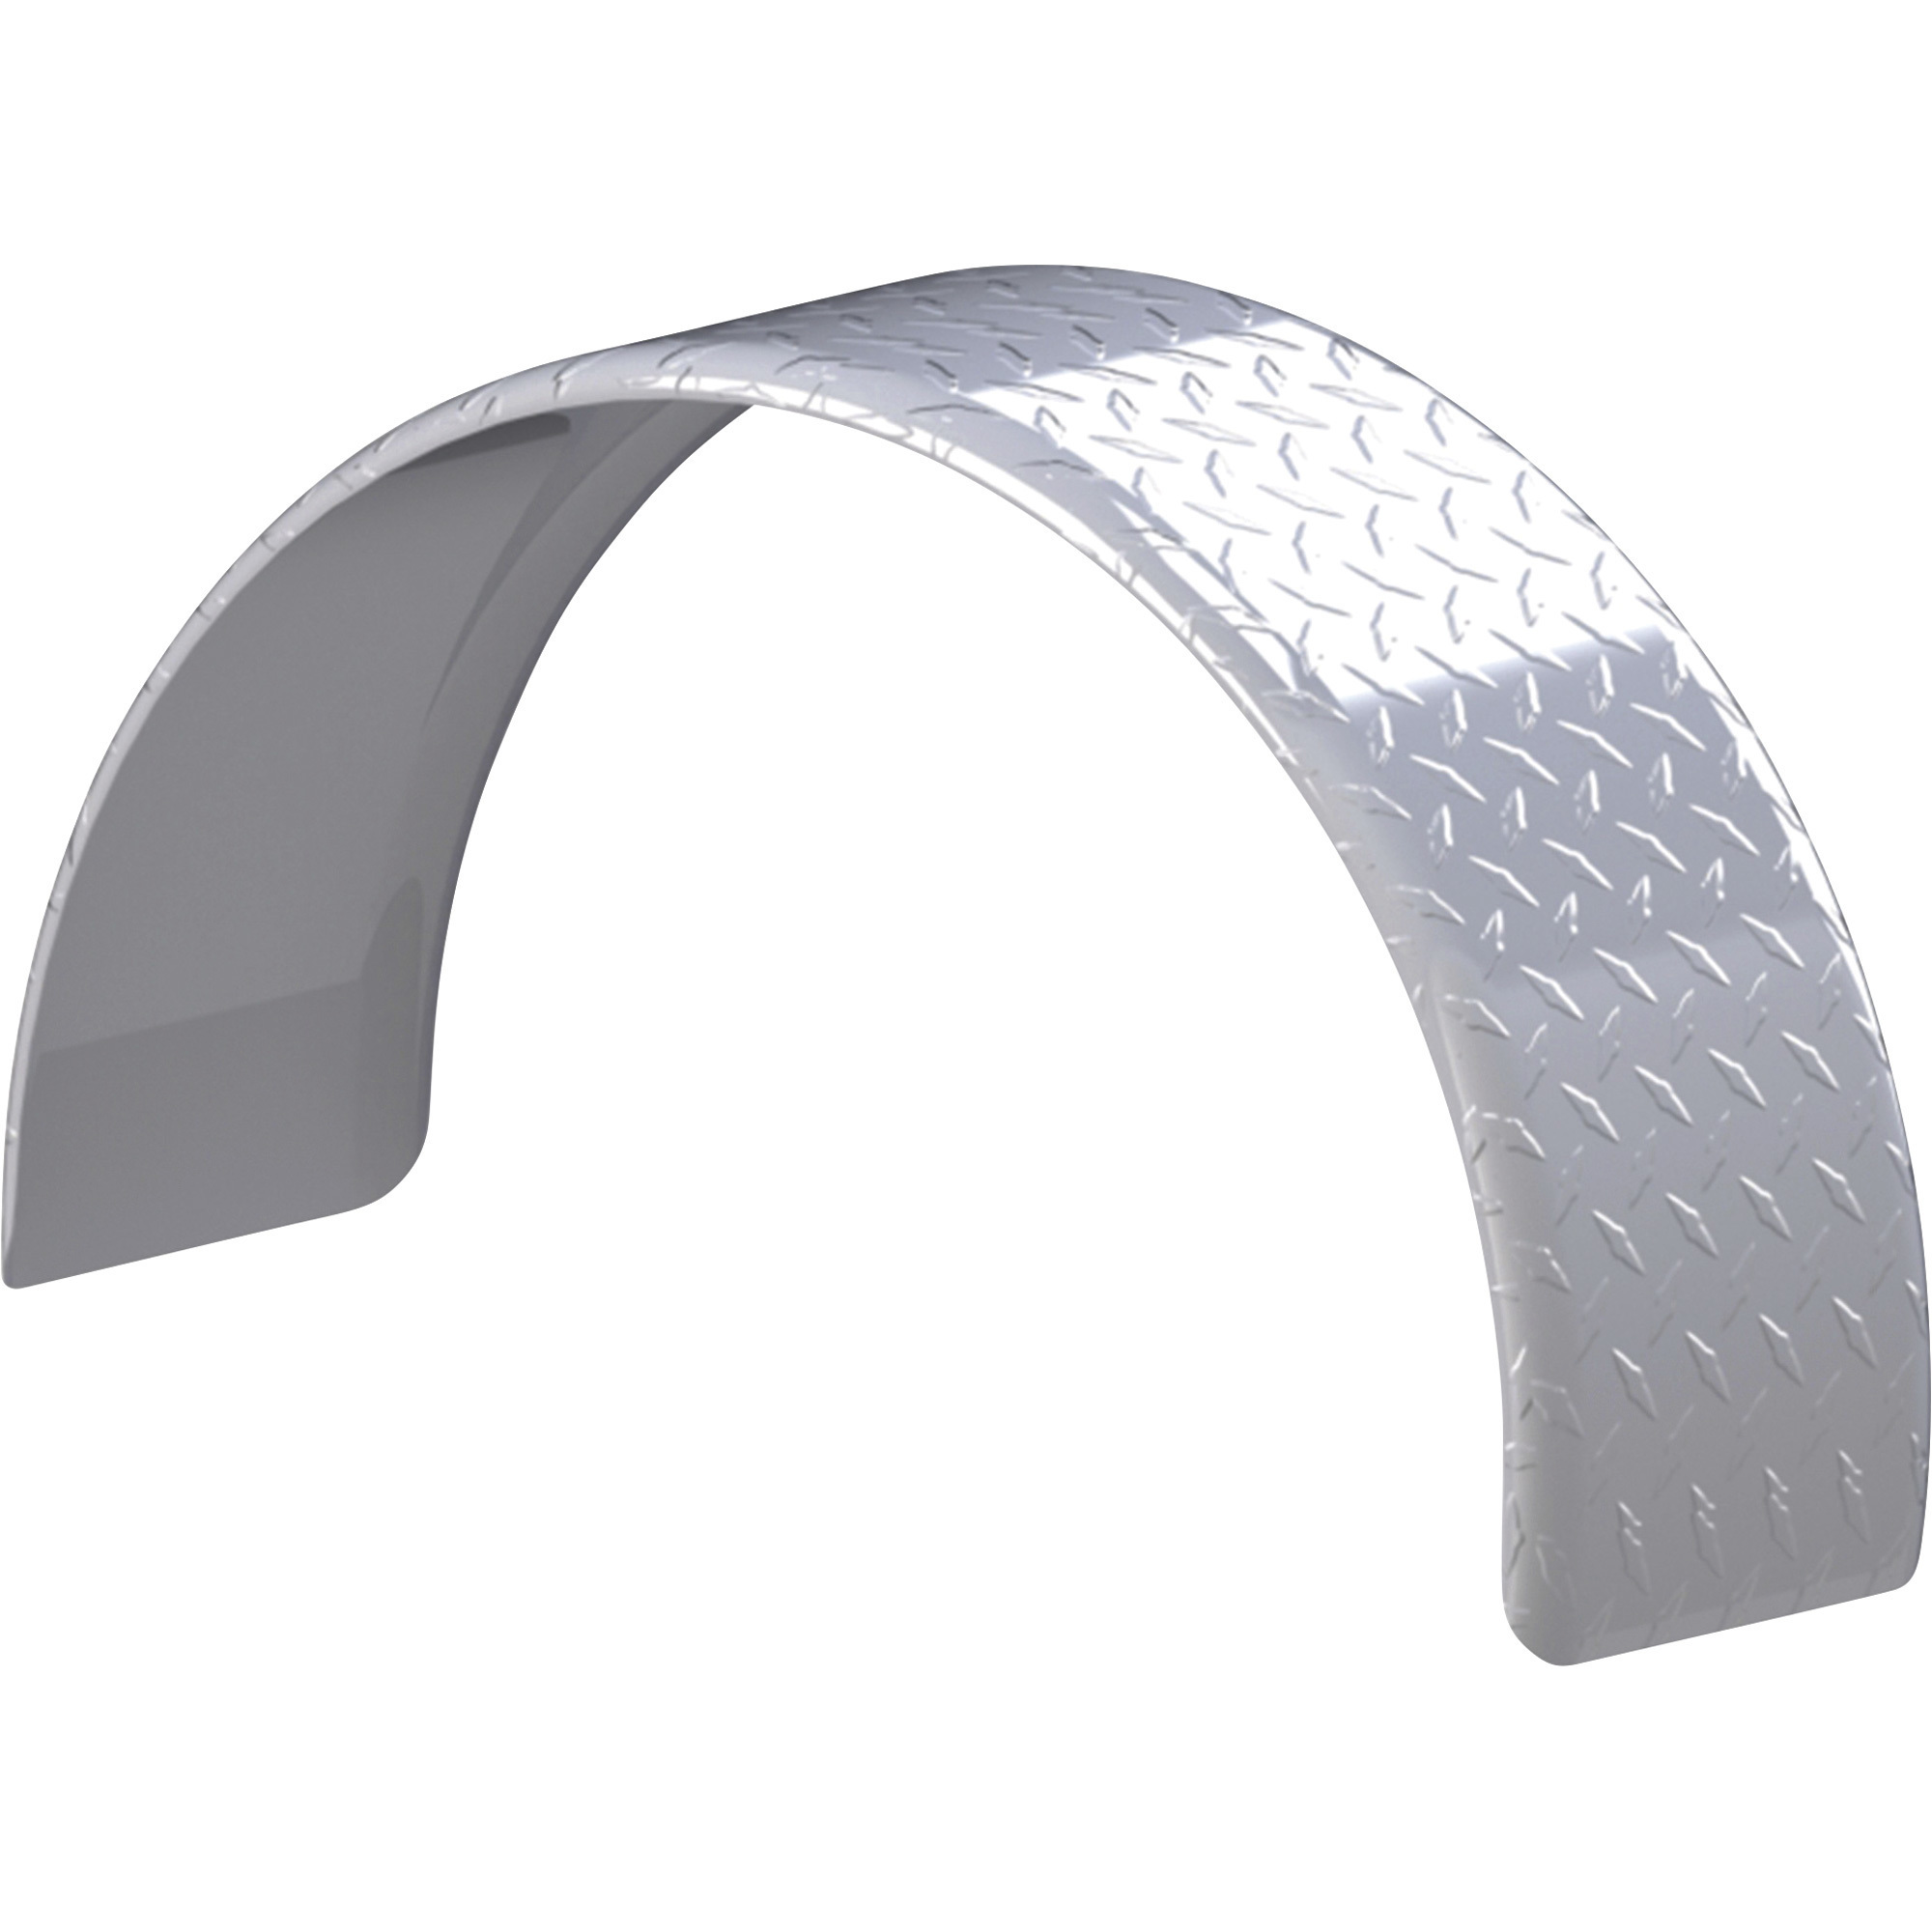 Tow Zone Single Round Aluminum Tread Trailer Fender, Fits 13Inch Tires, 28Inch x 9Inch x 16Inch